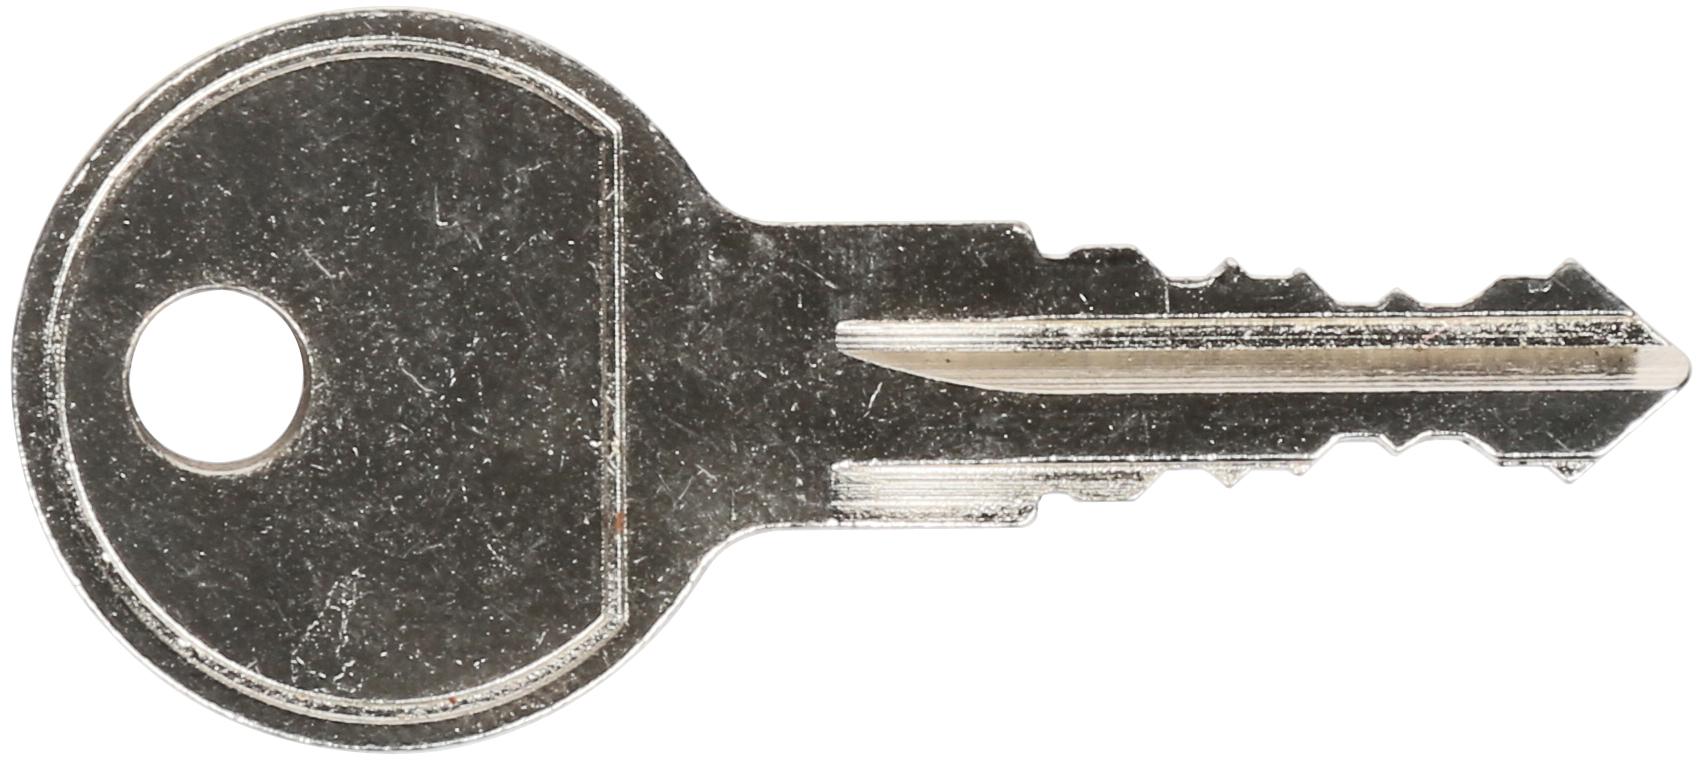 Spare Roof Box Key 119